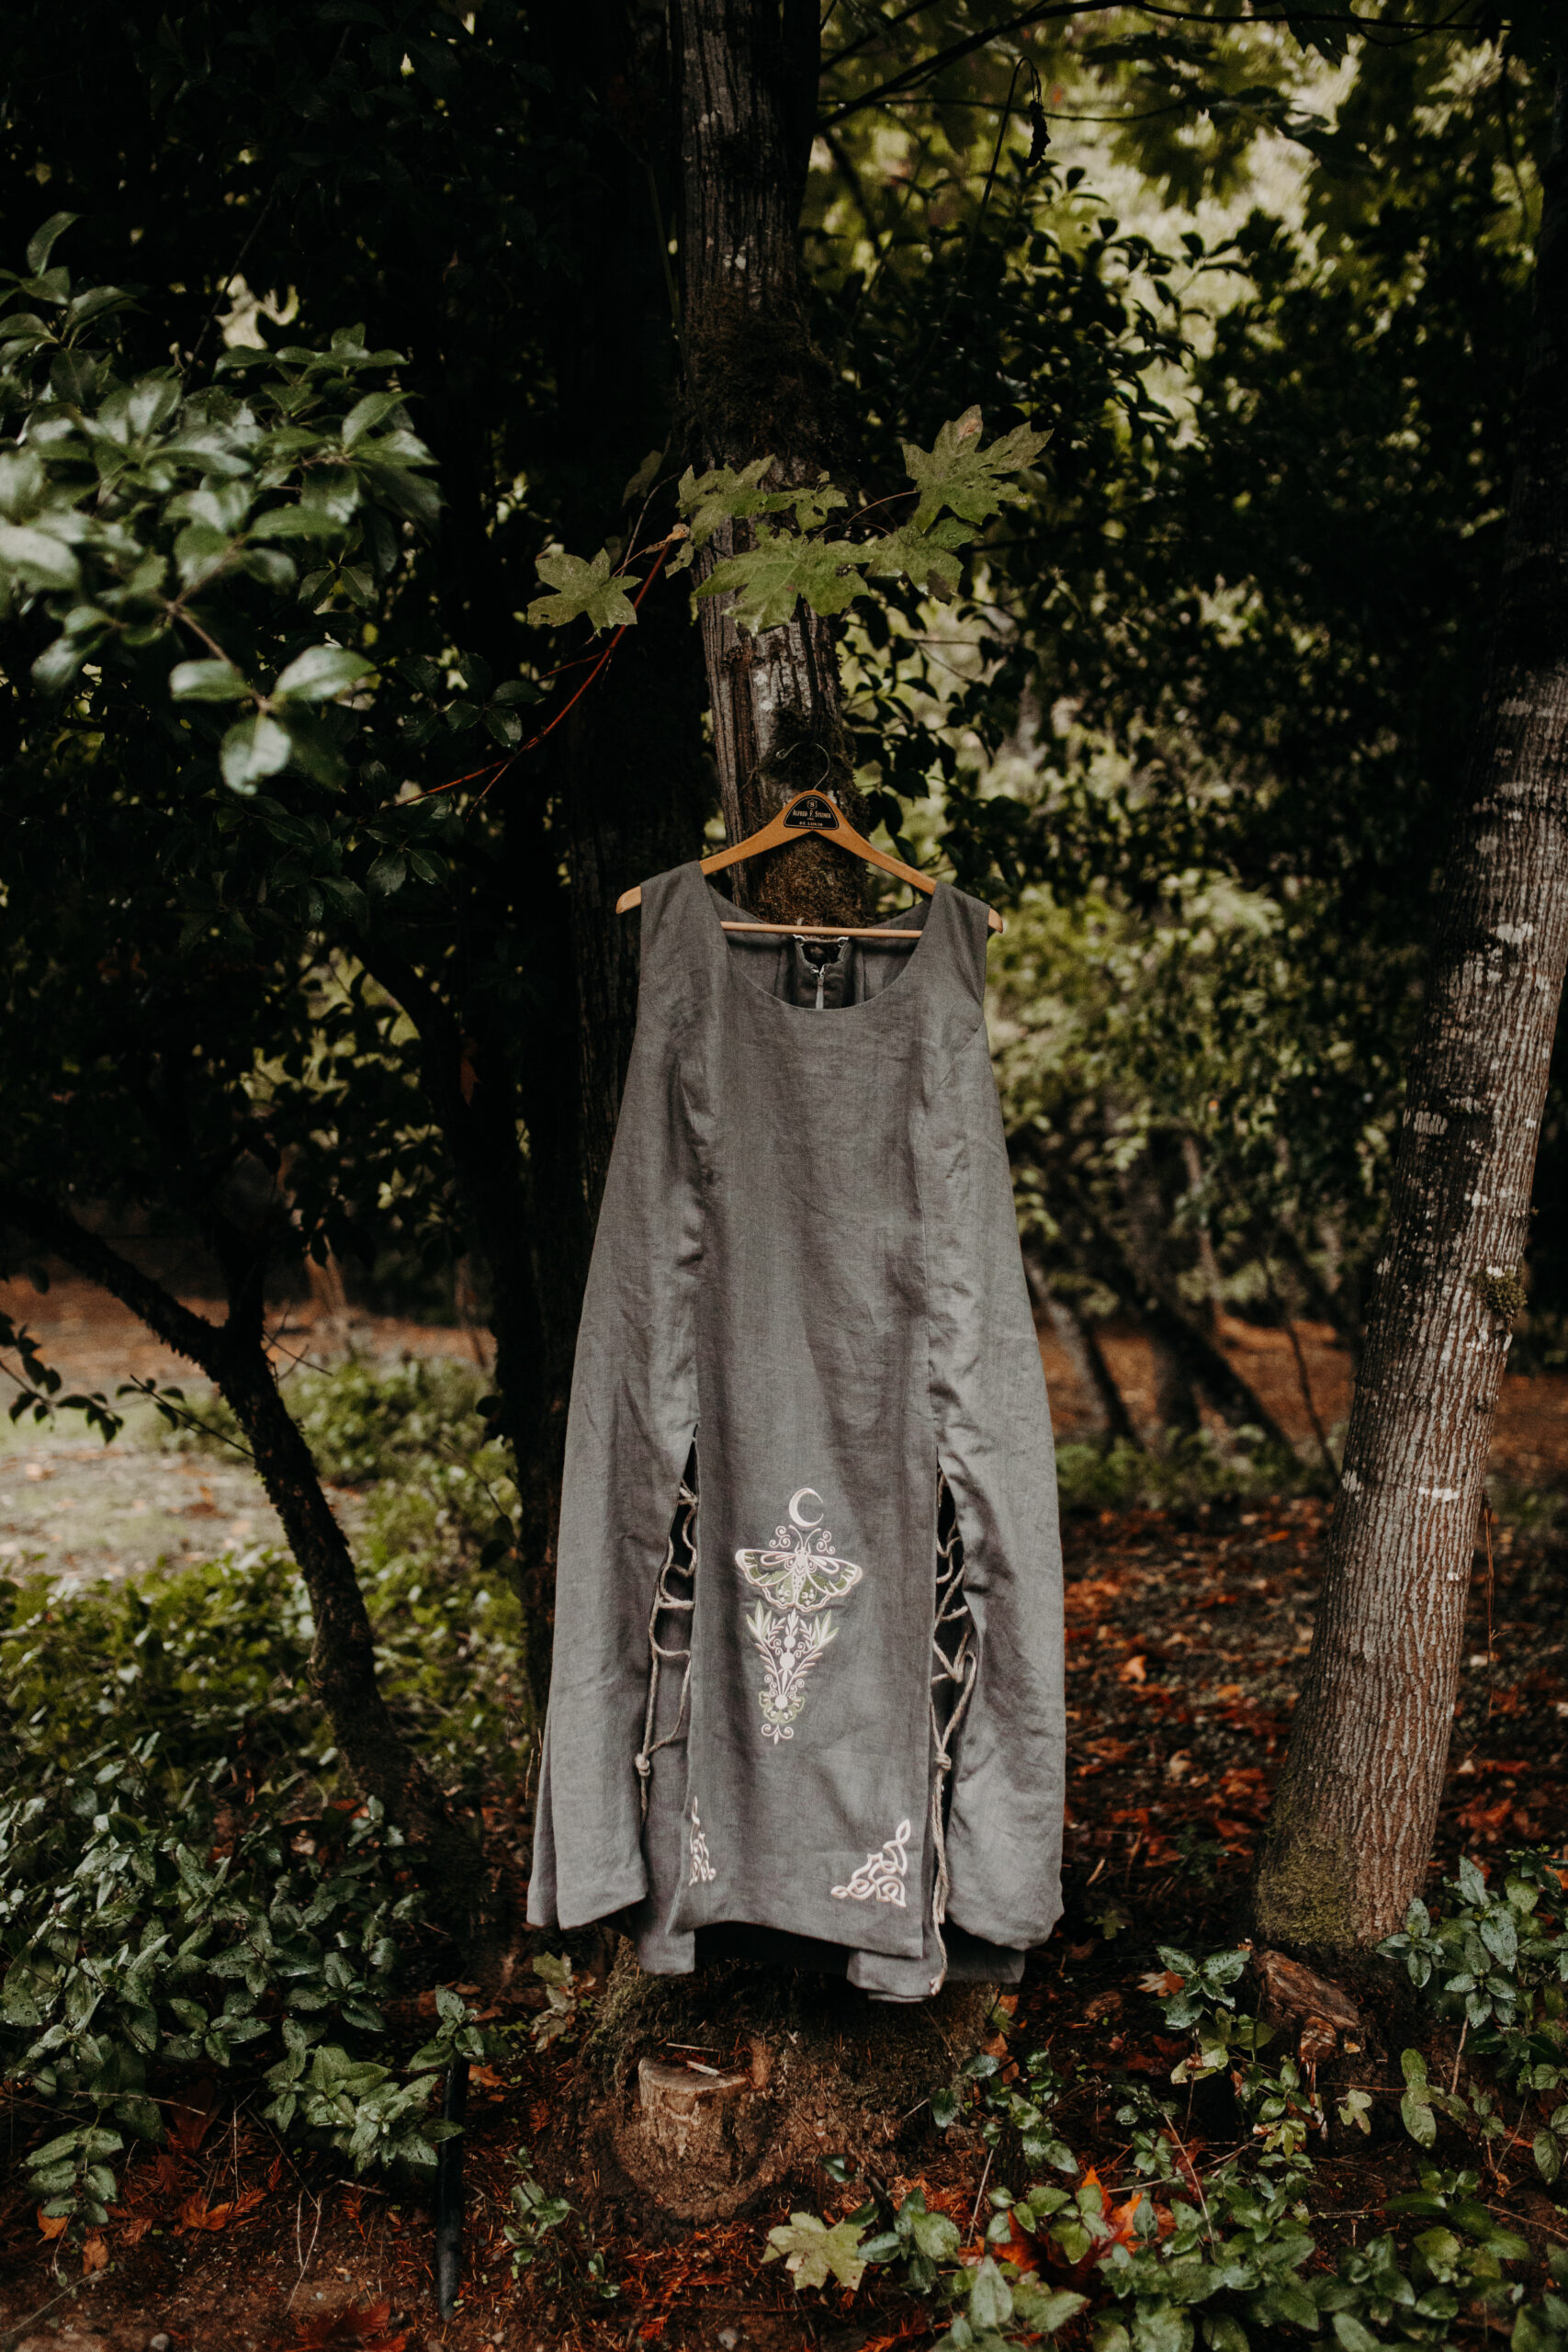 grey dress with white lunar moth design hangs from tree in Medford Oregon